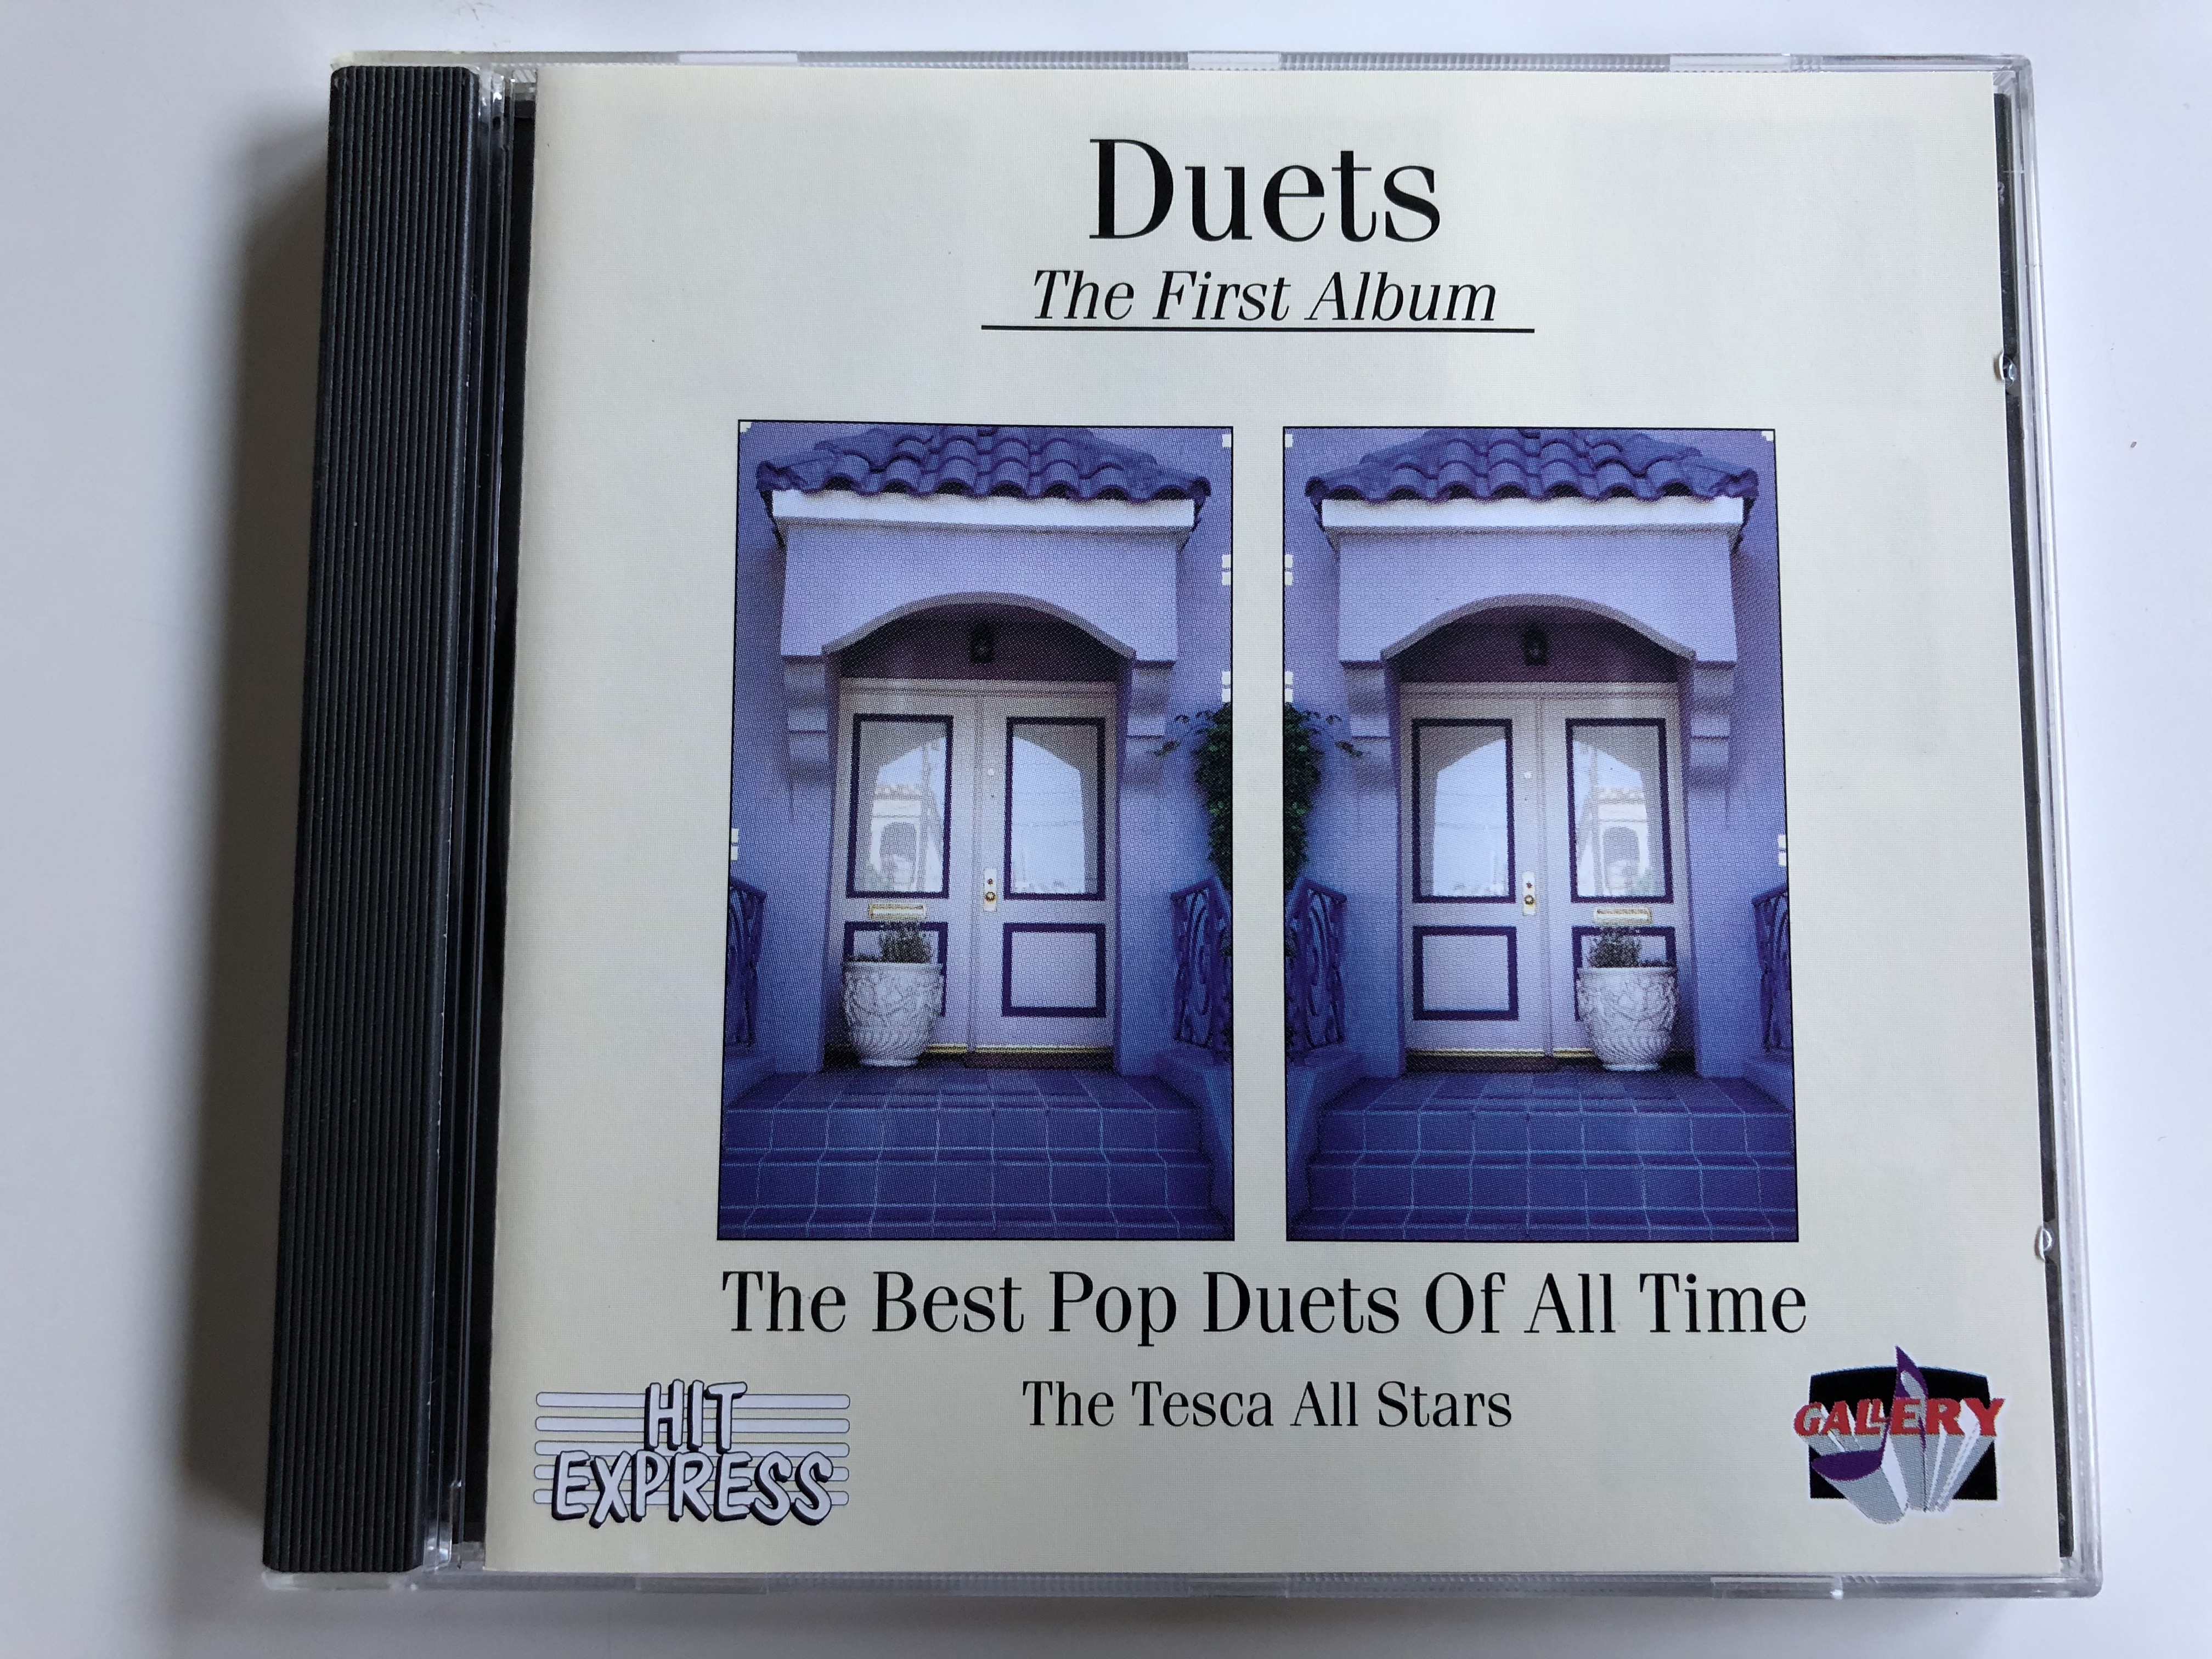 duets-the-first-album-the-best-pop-duets-of-all-time-the-tesca-all-stars-galery-audio-cd-cd-35127-1-.jpg